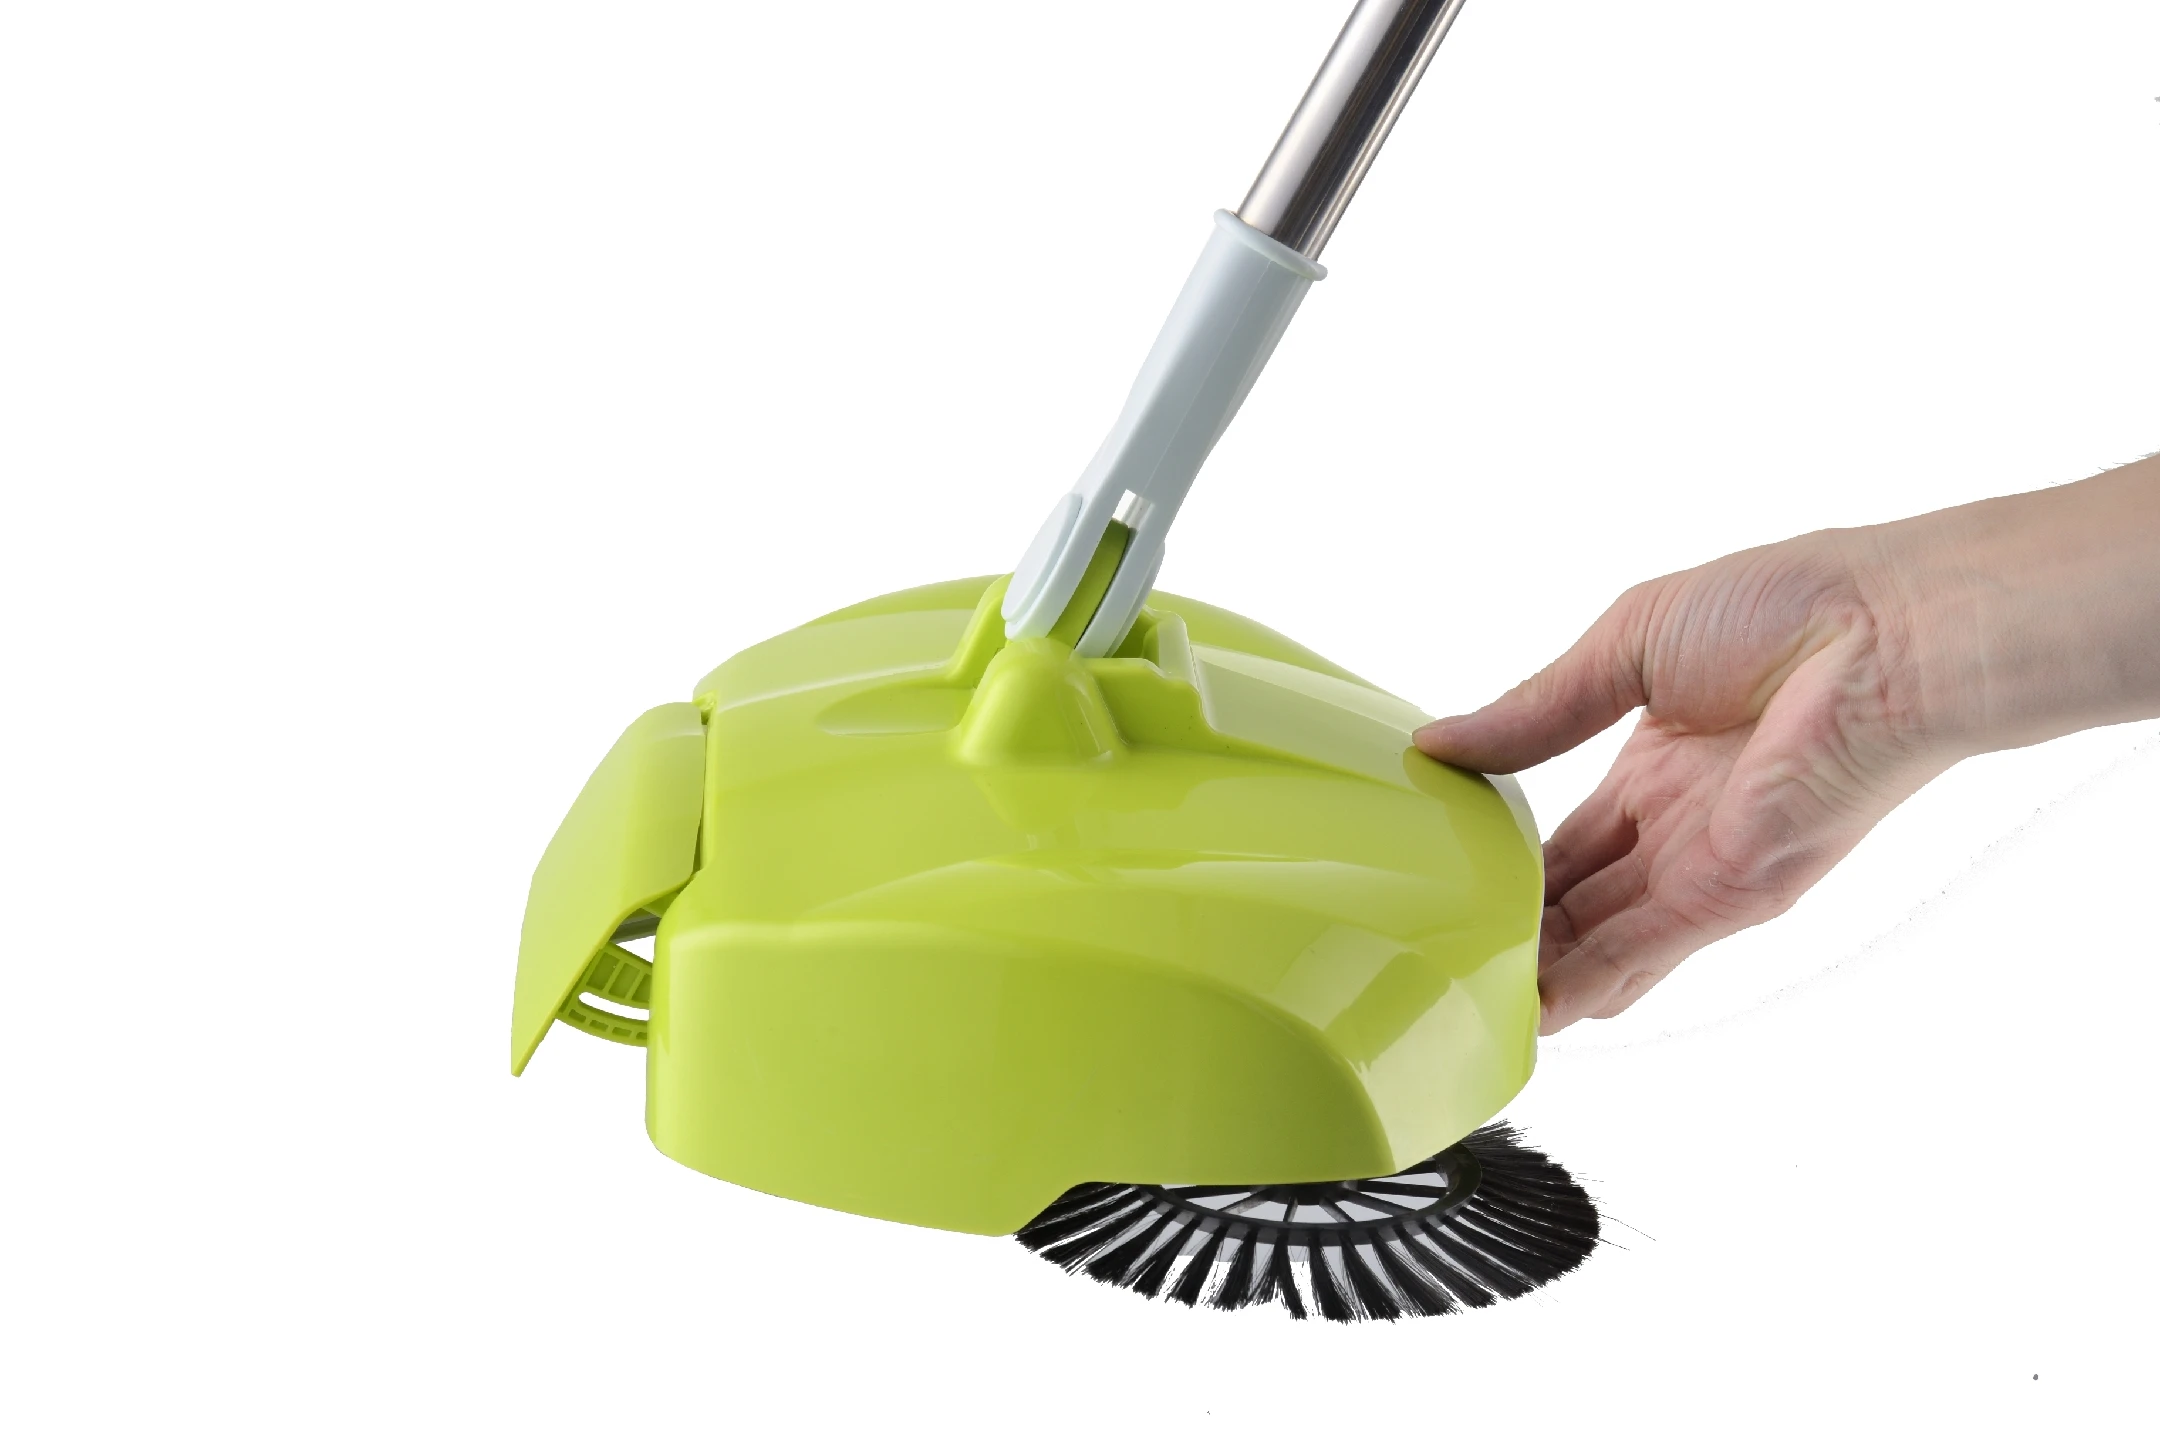 
Spin Cleaning Broom 360 Degree Swivel Manual Sweeper 